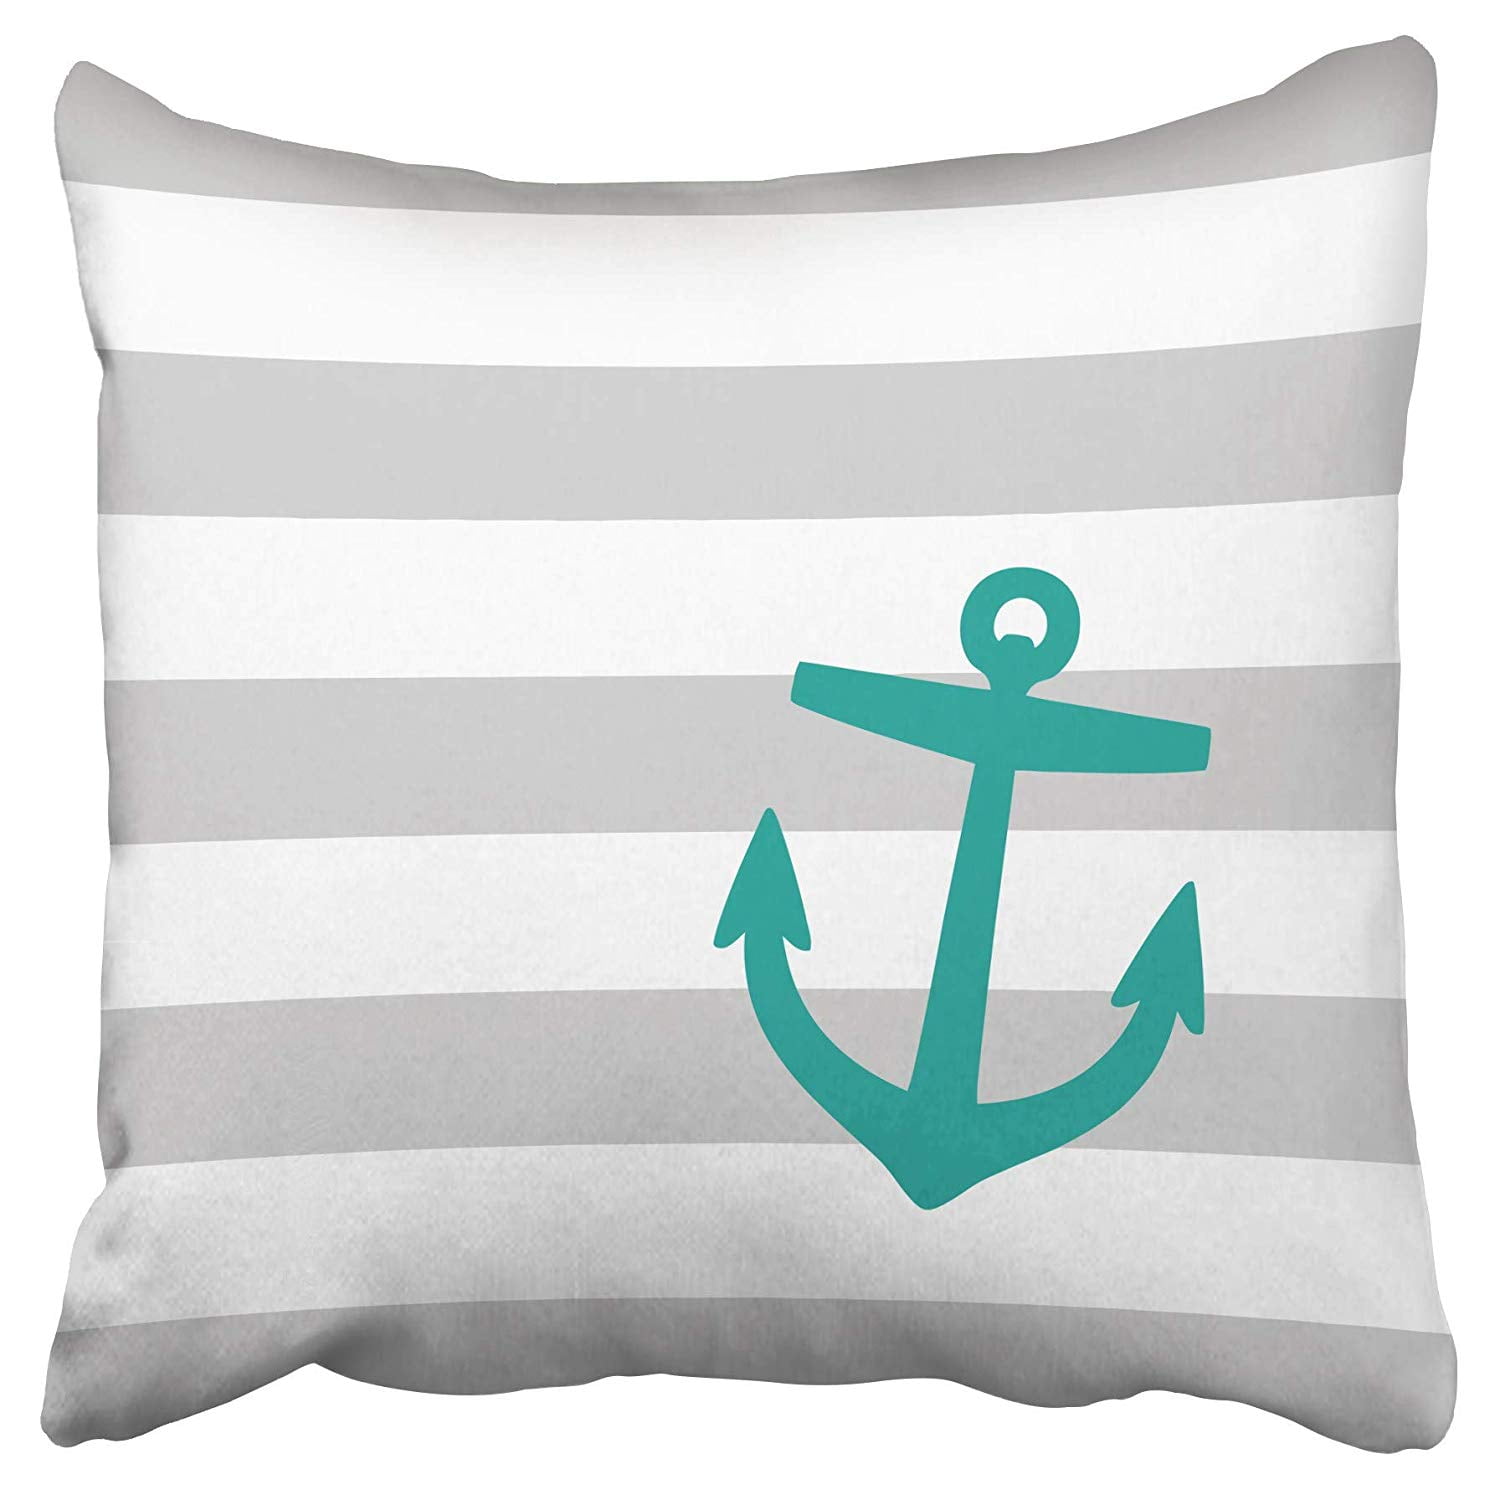 Yellow and Gray Nautical Stripes and Cute Anchor Throw Pillow Case 18 x 18 Pillow Sham 